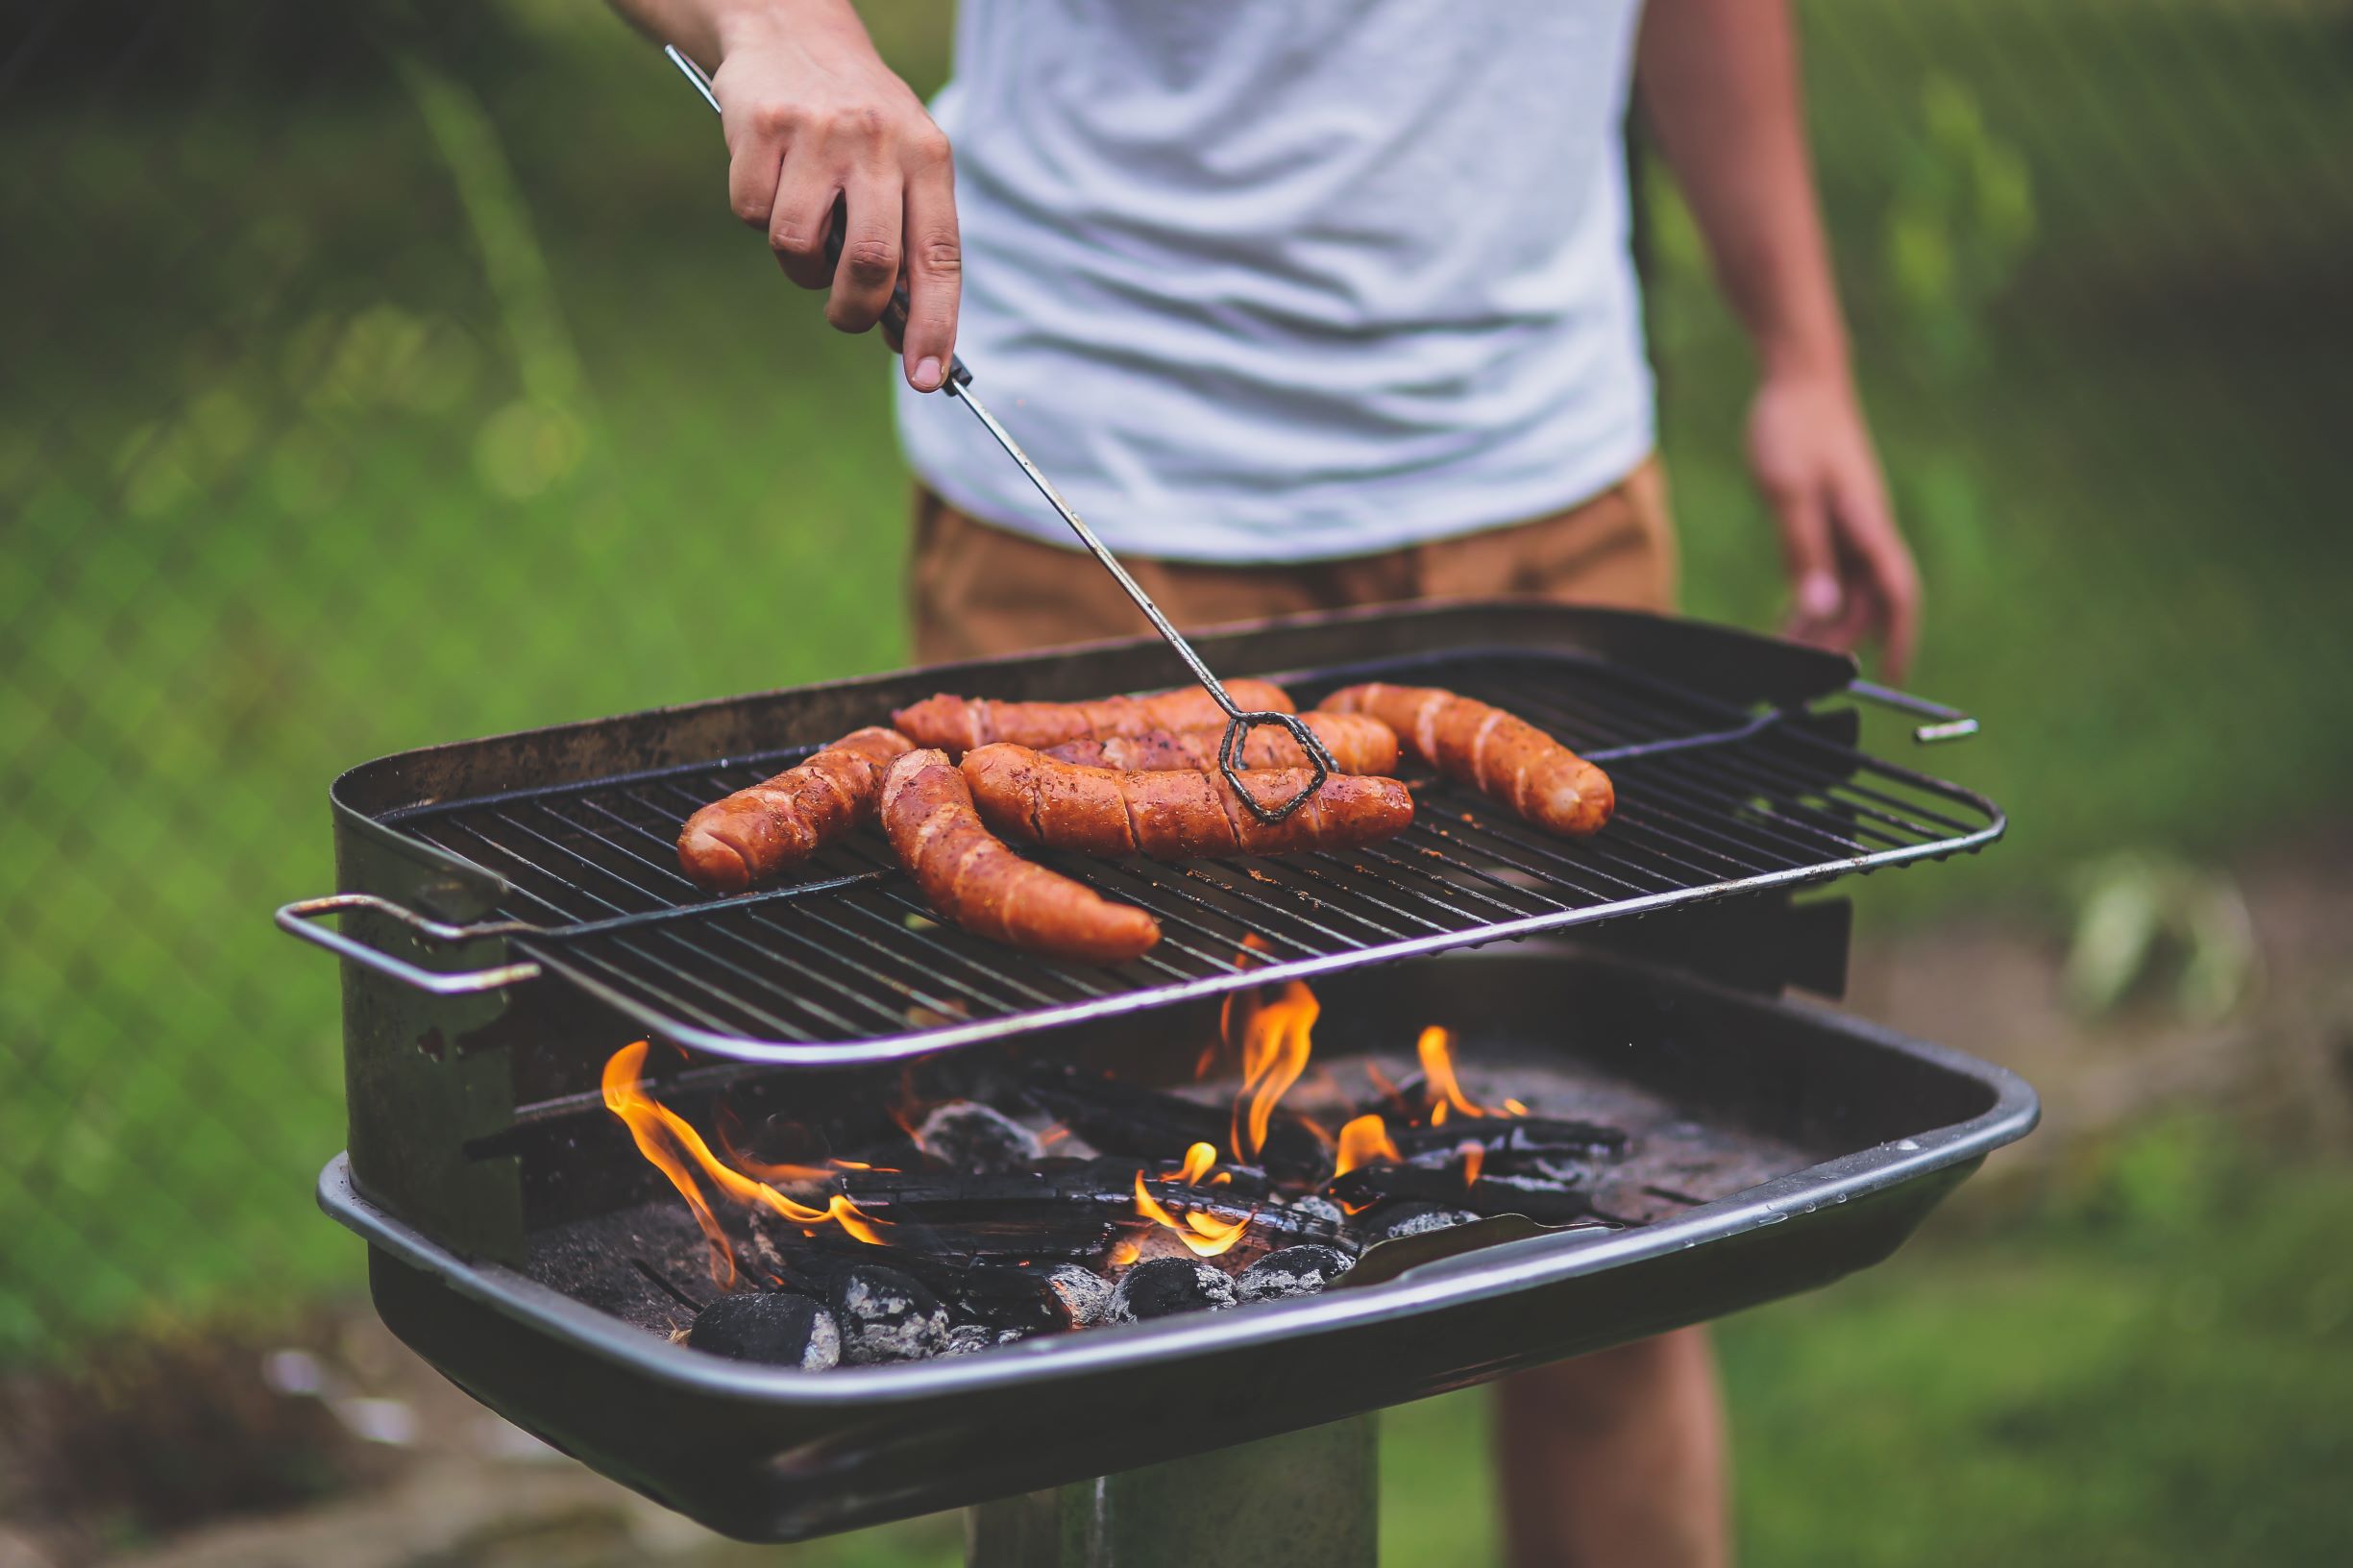 man grilling hot dogs over charcoal grill